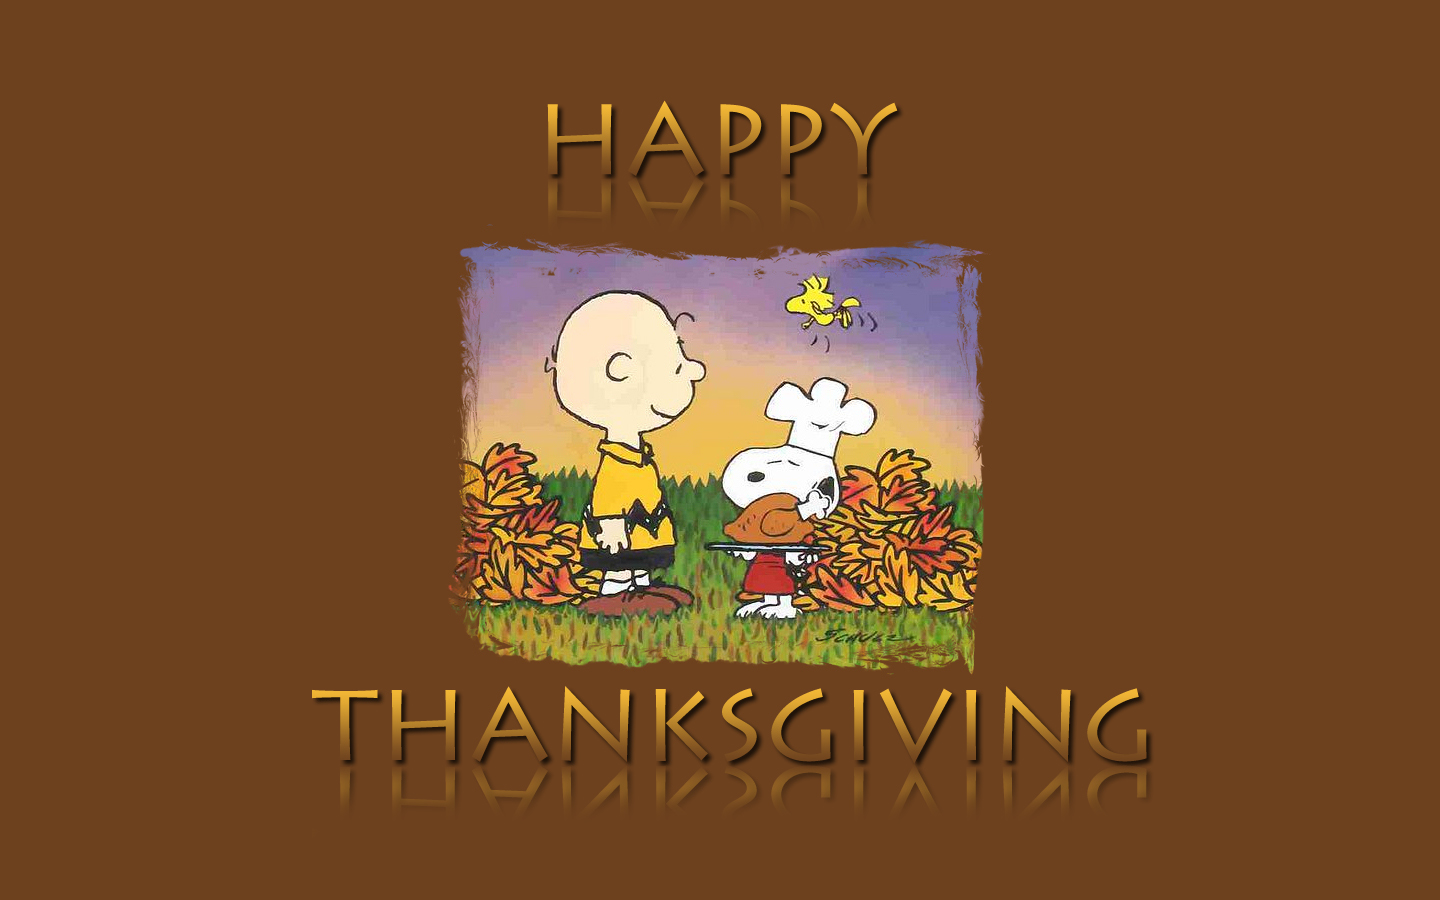 thanksgiving wallpapers 1080p